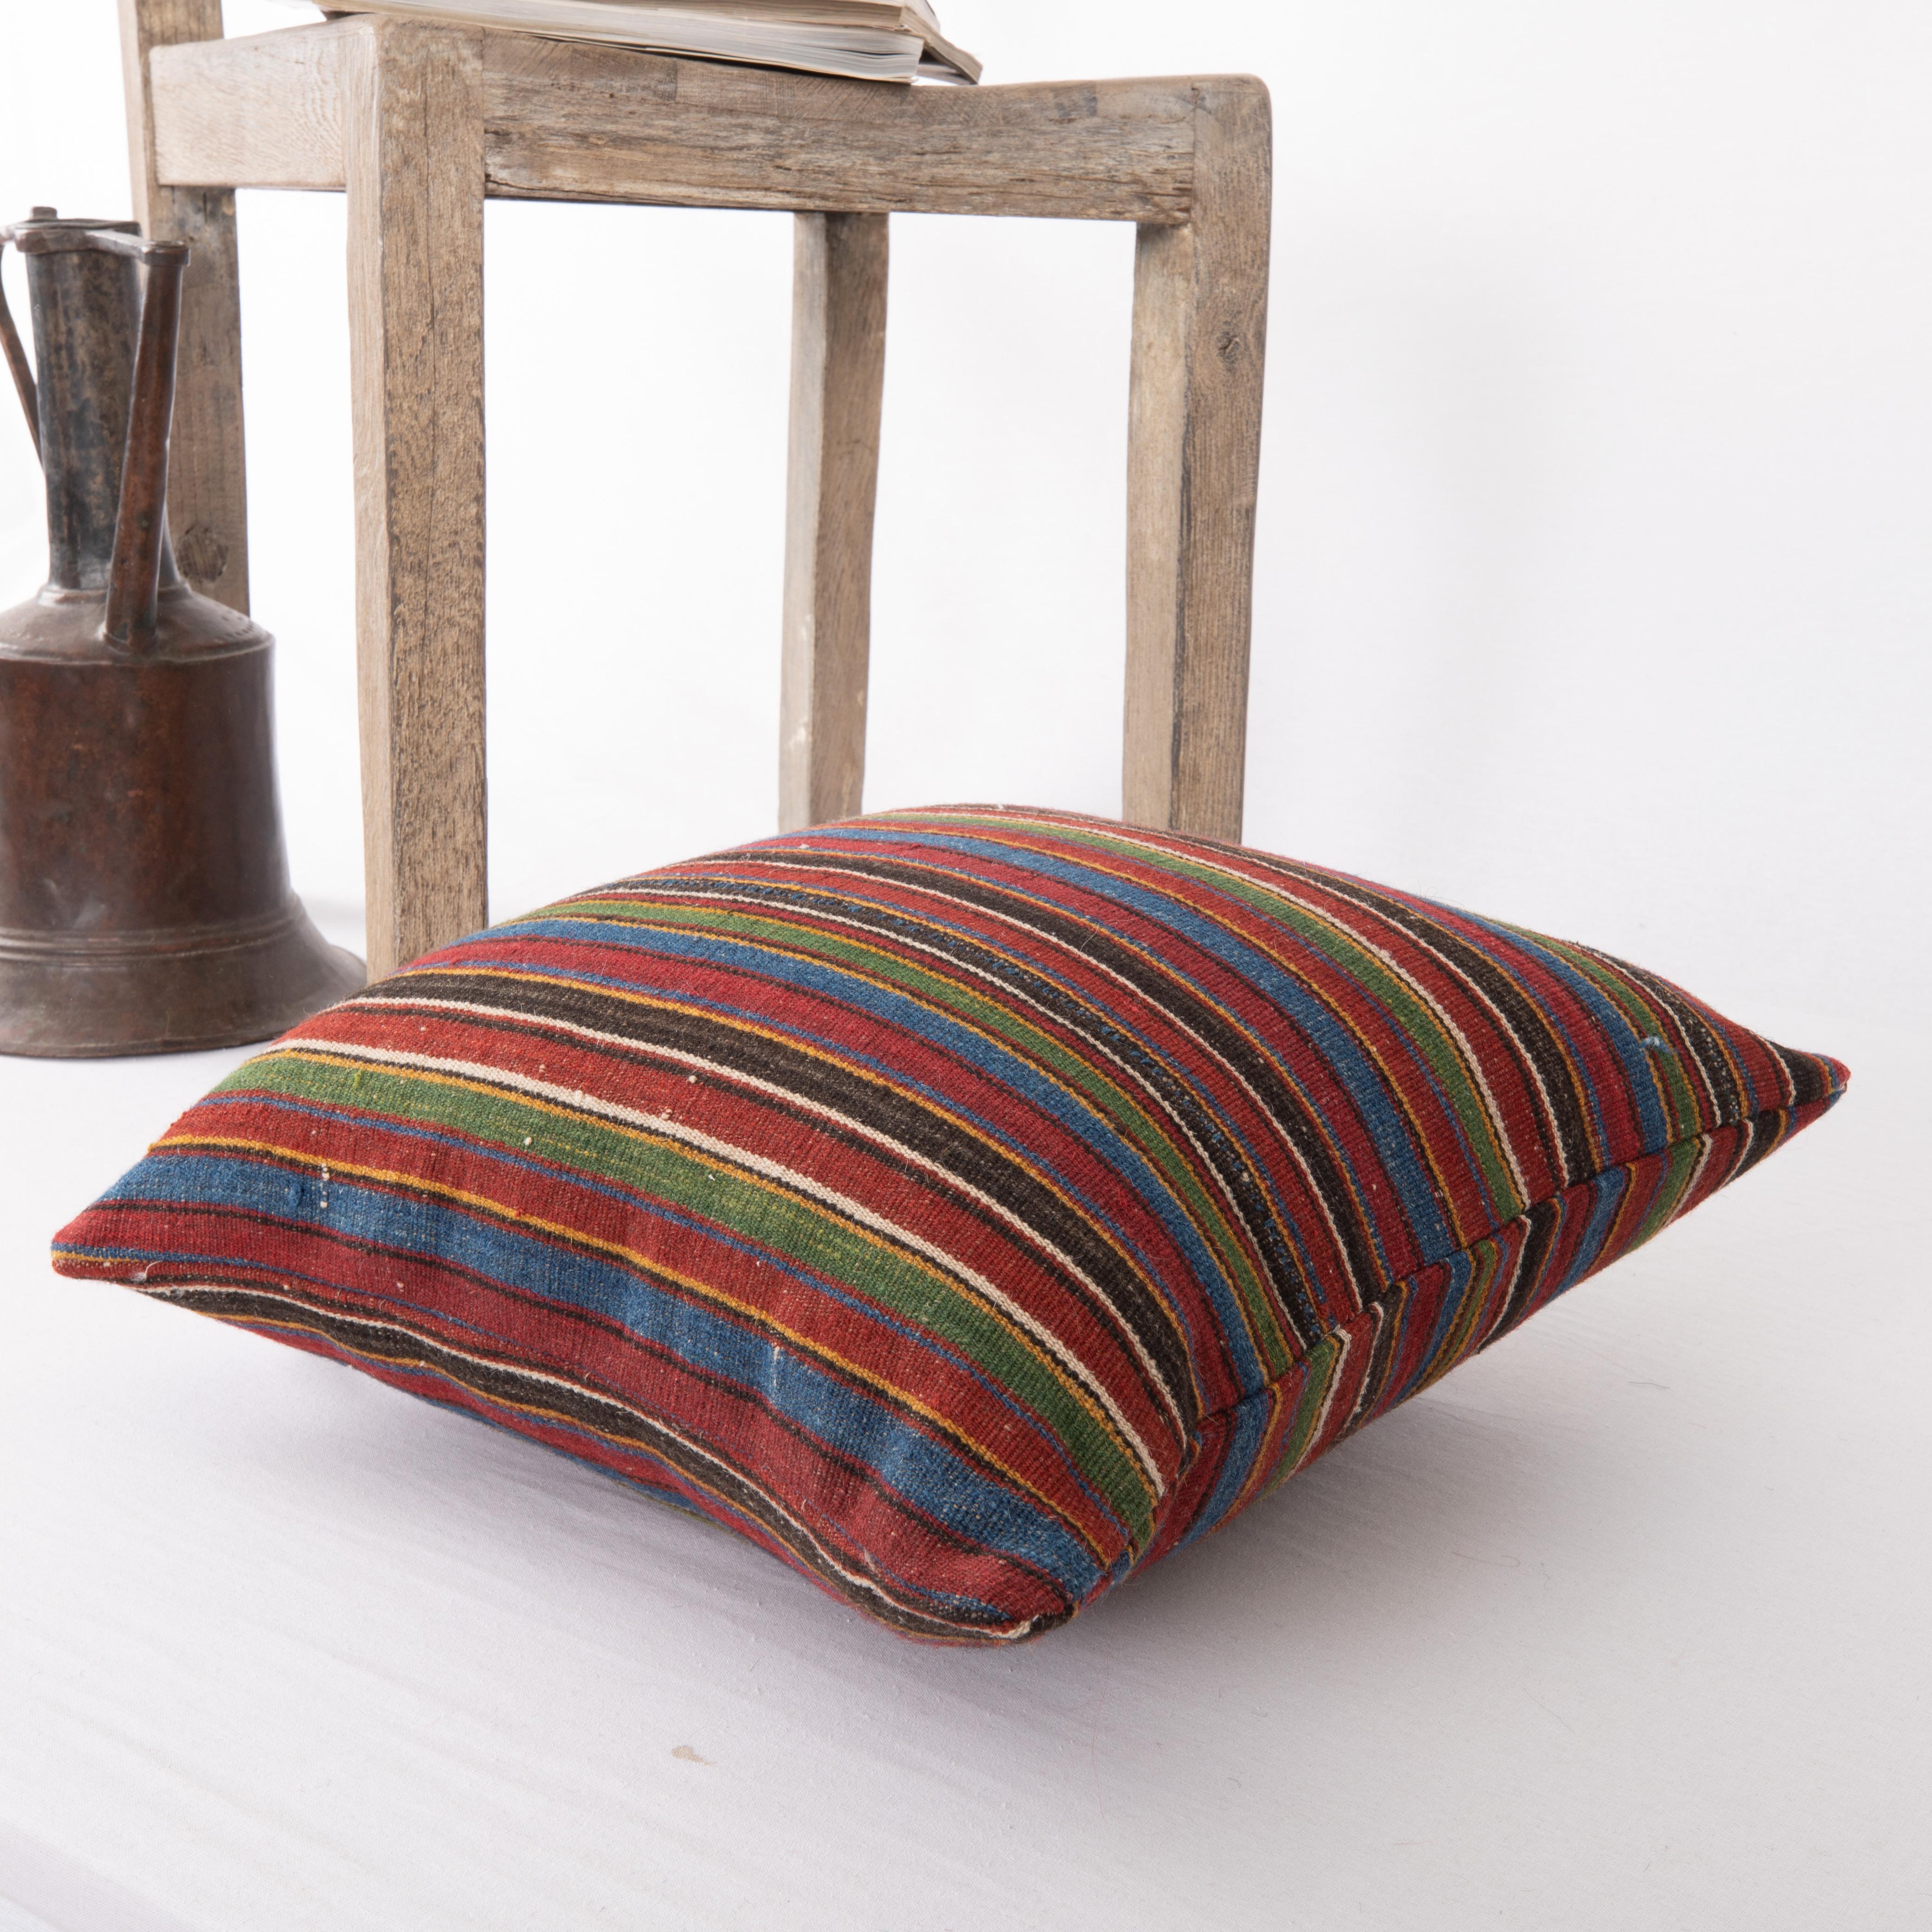 Double Sided Kilim Pillow Cover Made From an Antique Kilim In Good Condition For Sale In Istanbul, TR